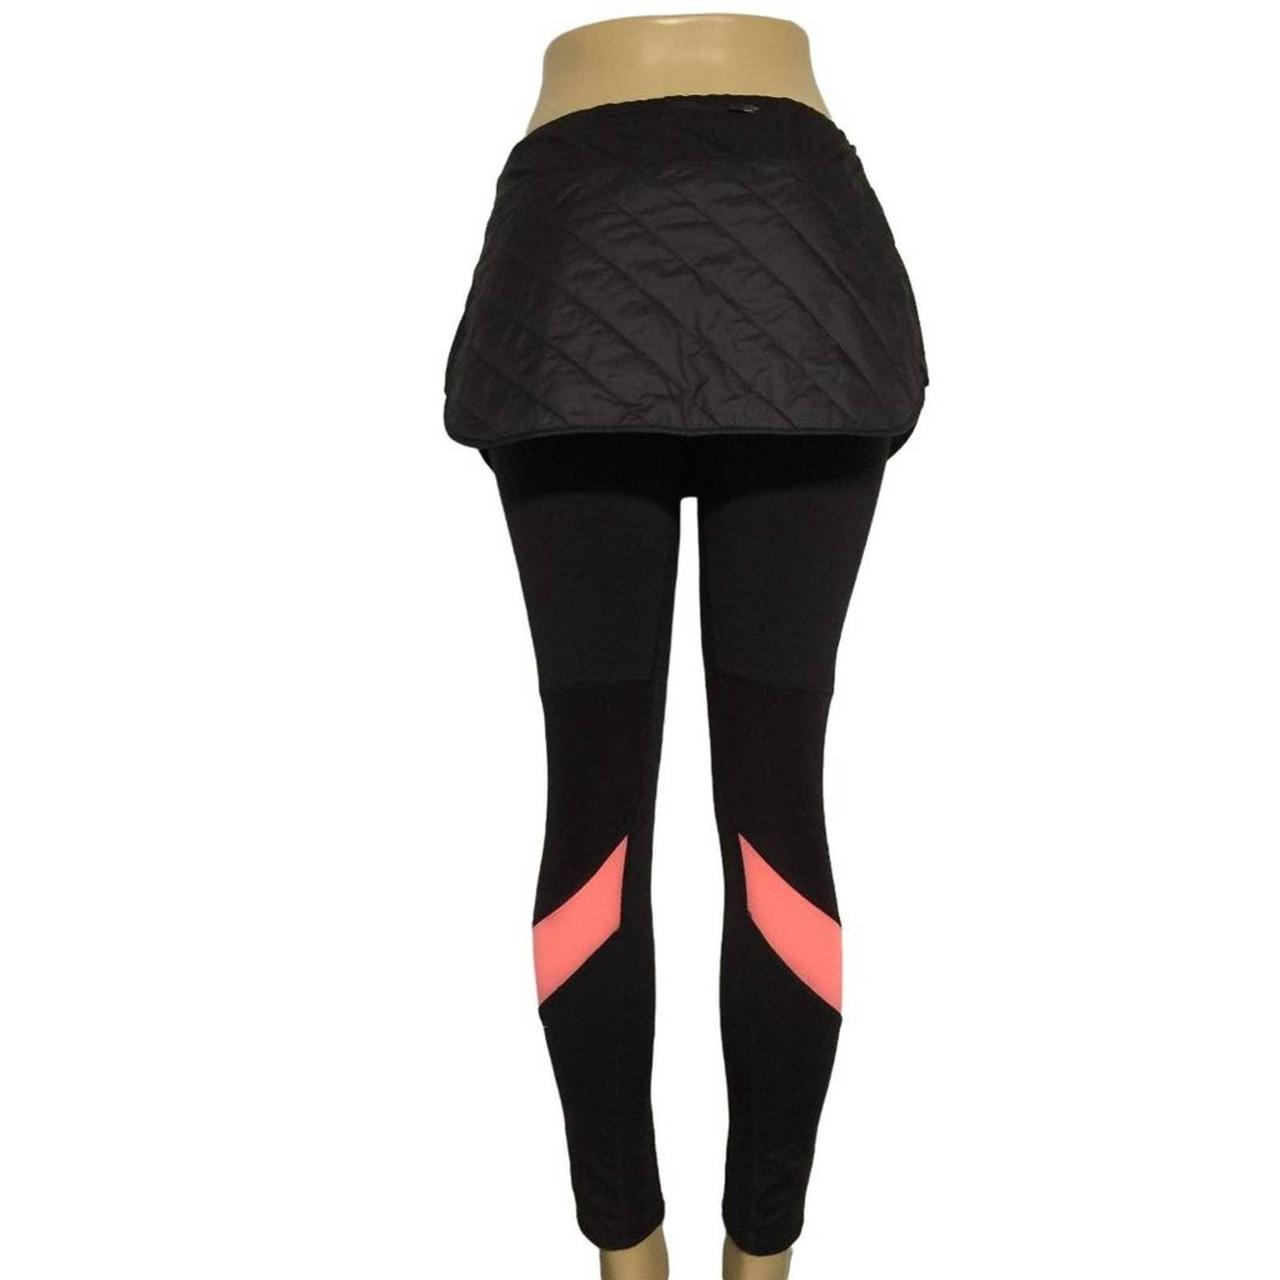 Product Image 4 - LUCY black leggings with skirt